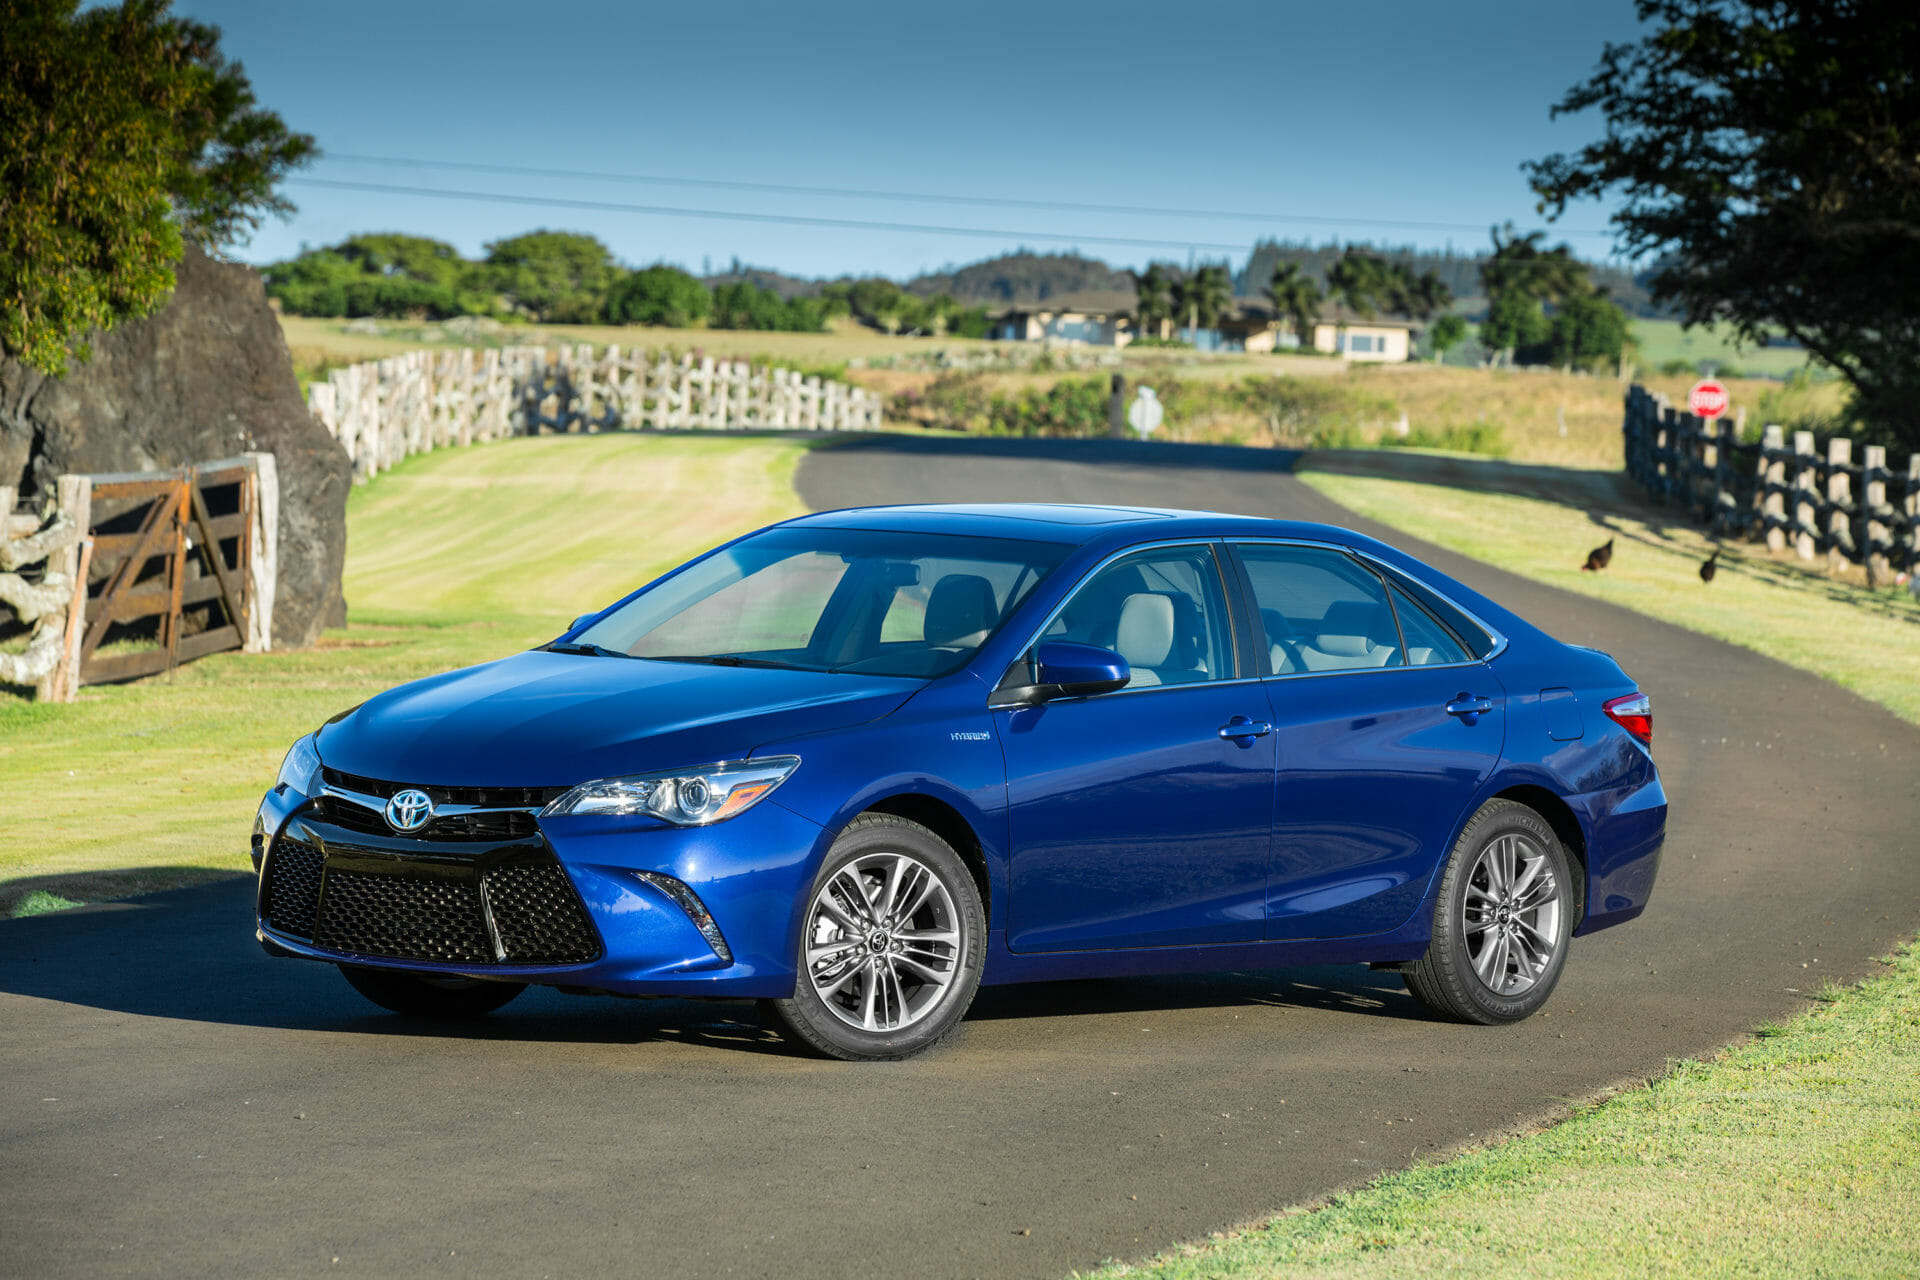 2015 Toyota Camry Review: A Midsize Sedan Loaded With Tech & Comfort